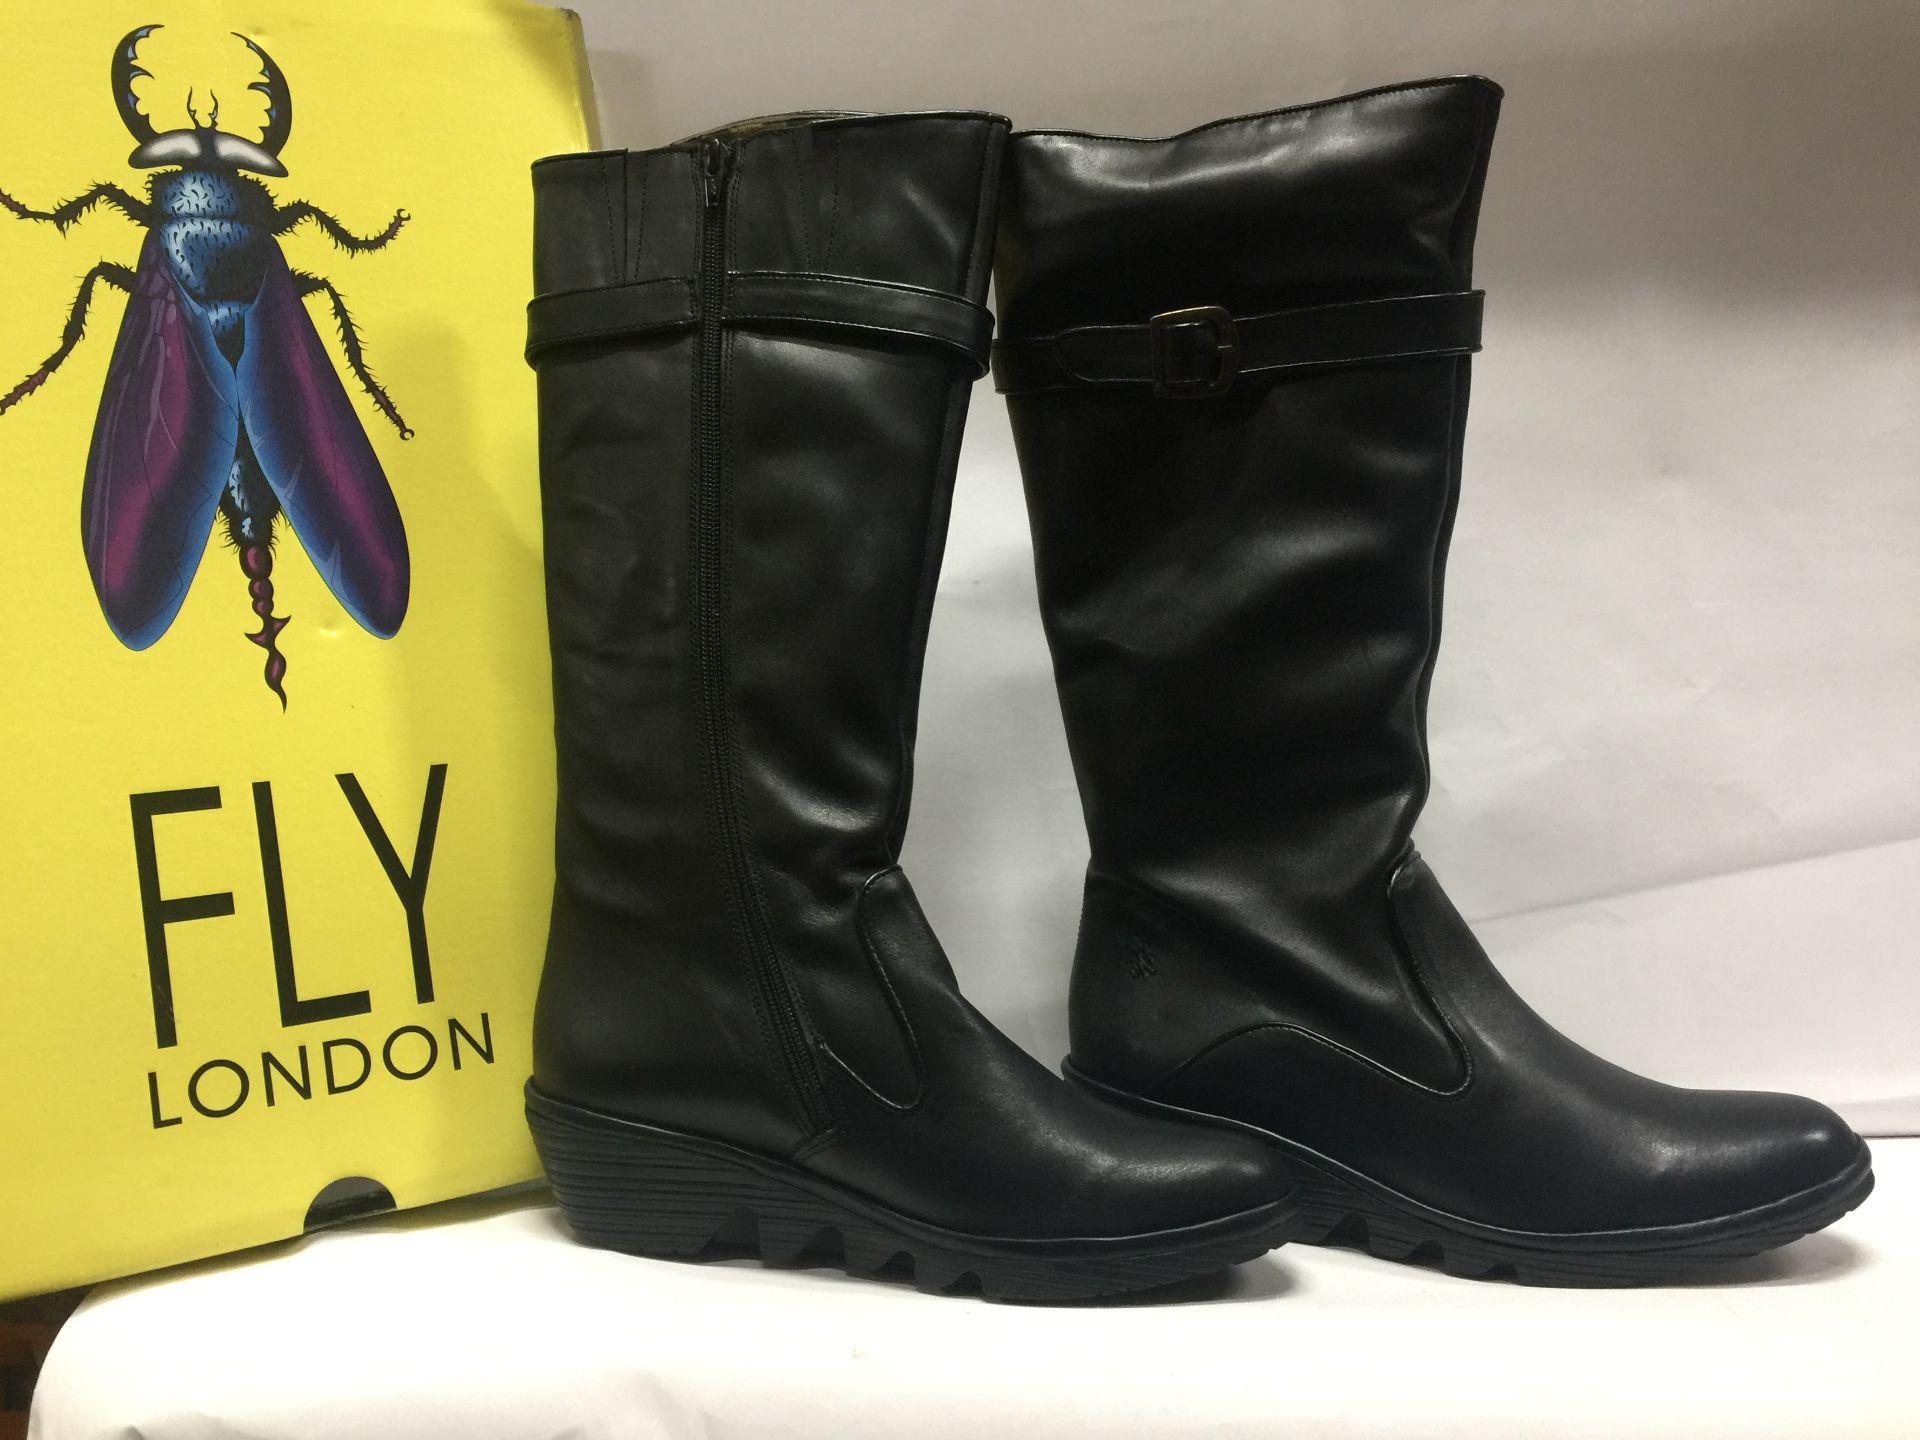 5 x Fly London Women's Boots Mixed Sizes, Styles and Colours Size Ranging EU 39 - EU 42 - Customer R - Image 3 of 4